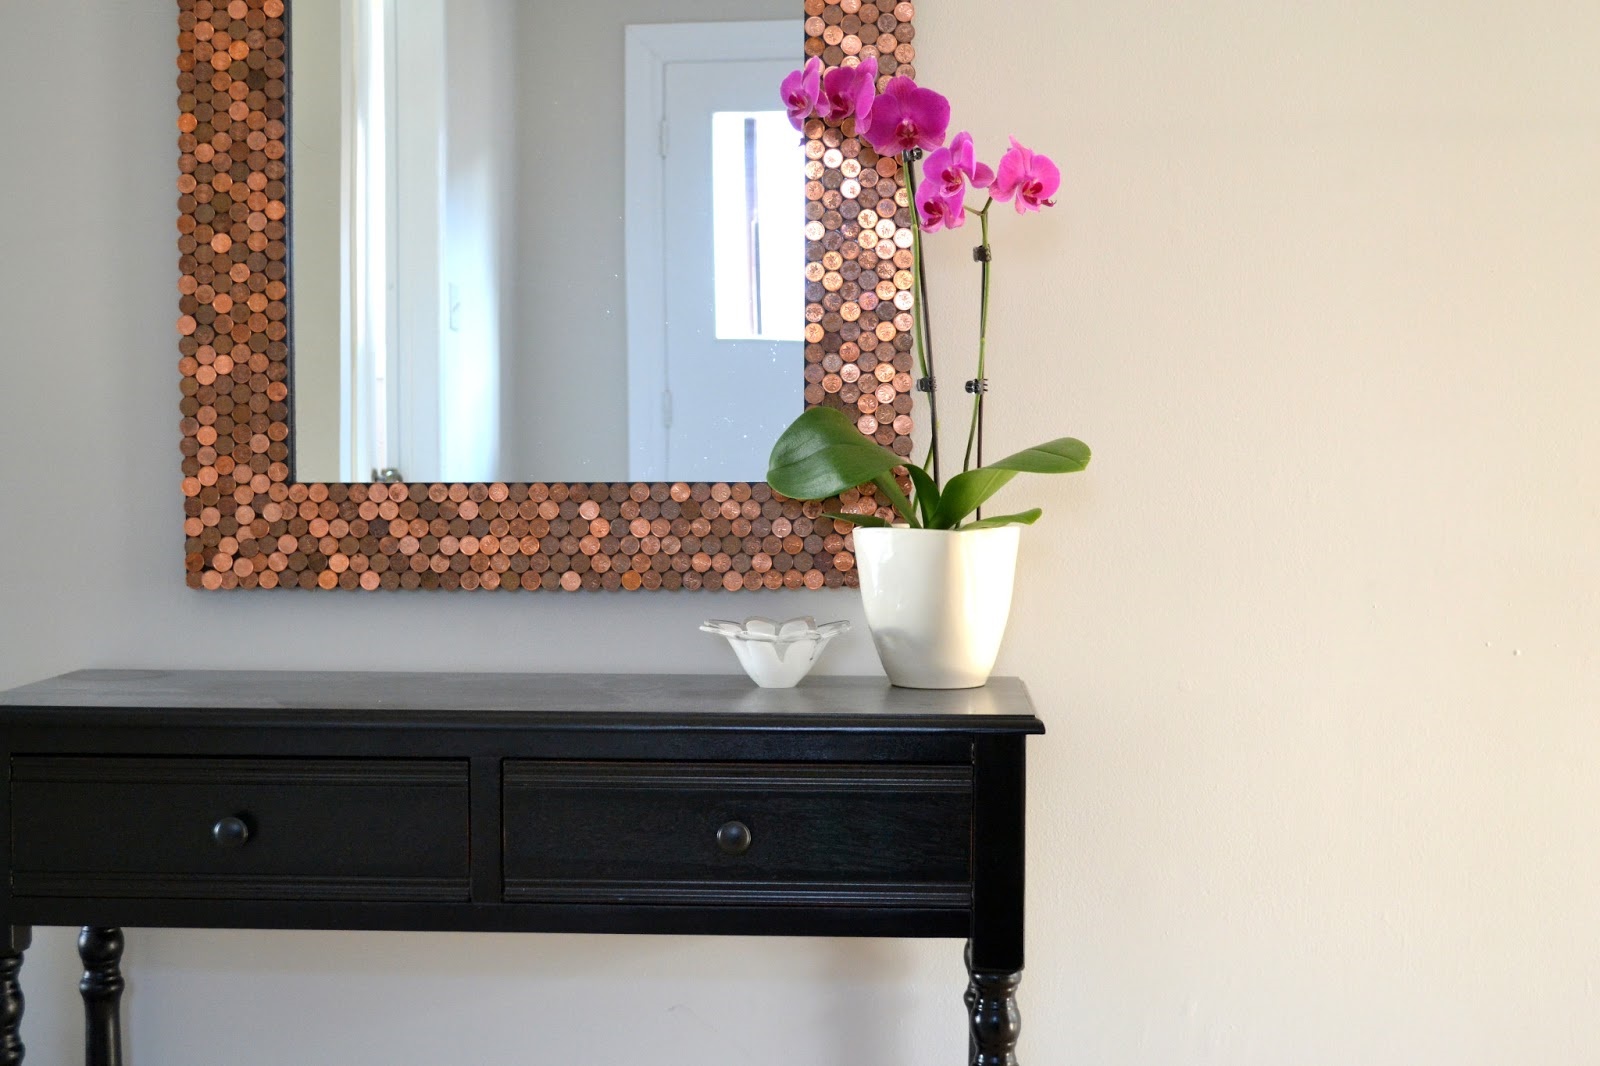 Making Cents of Home Décor: 15 DIY Ideas with Pennies